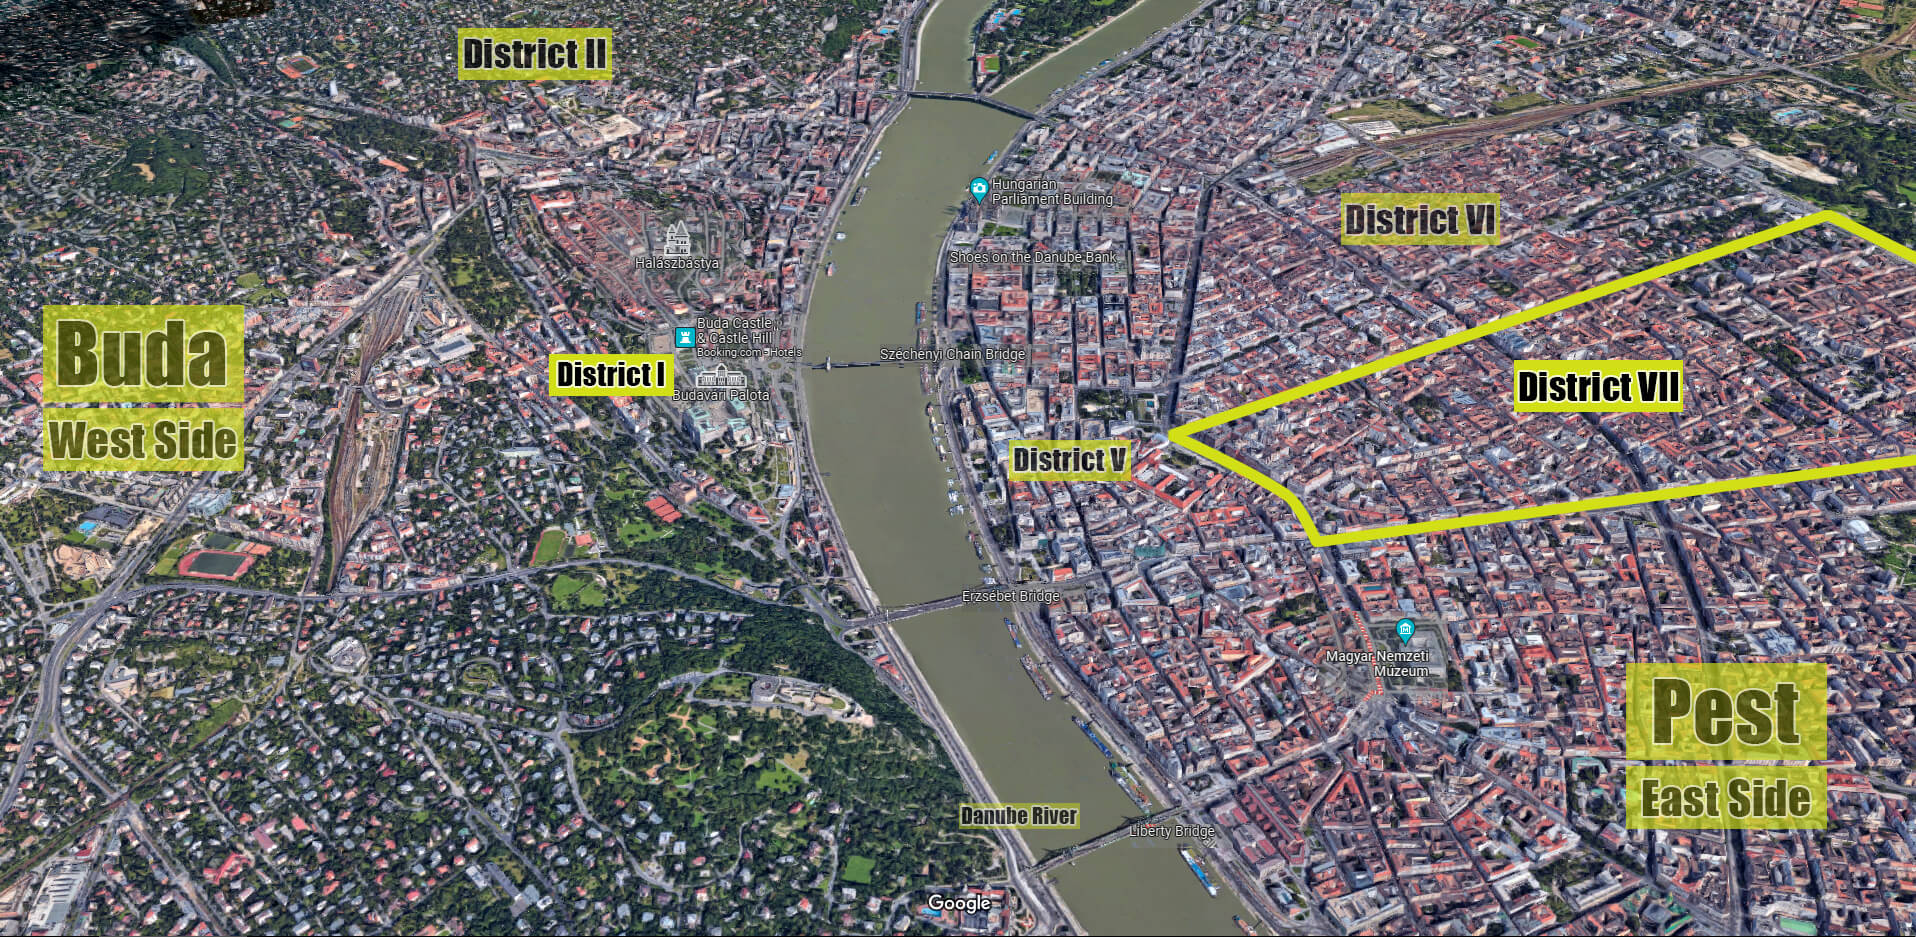 Satellite image showing where District VII is located in Budapest with outlined borders